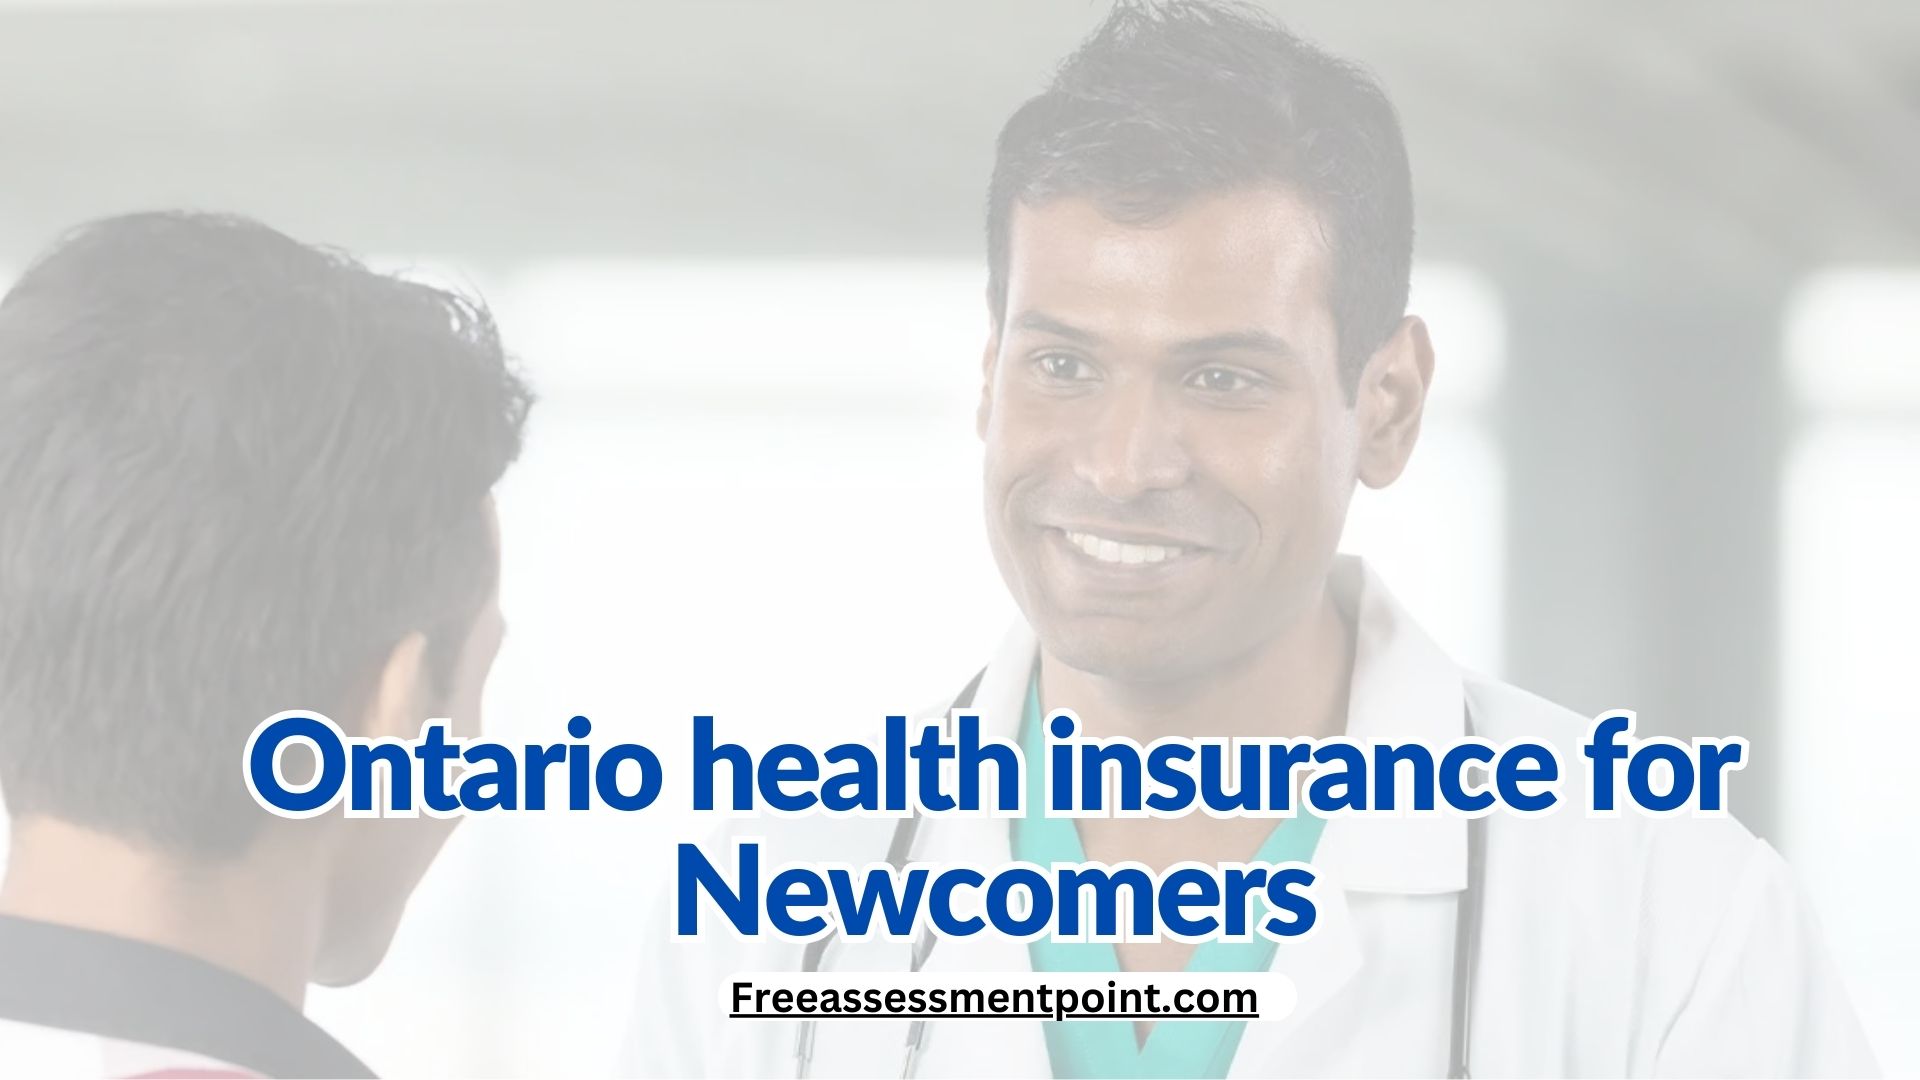 Ontario health insurance for Newcomers